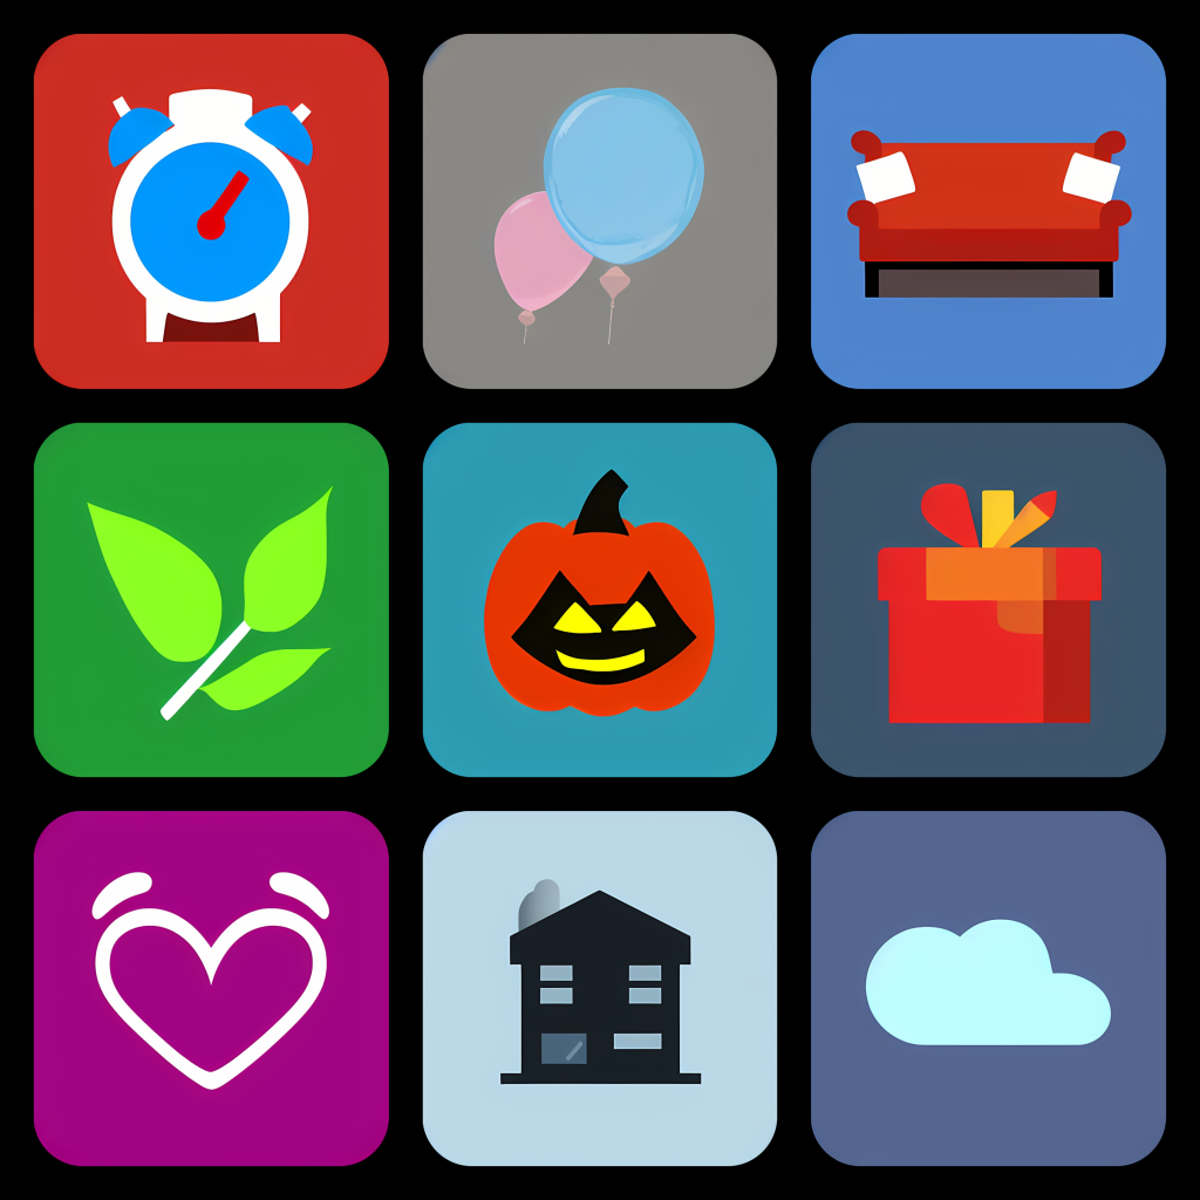 App-Icon-collage-1024x1024.png